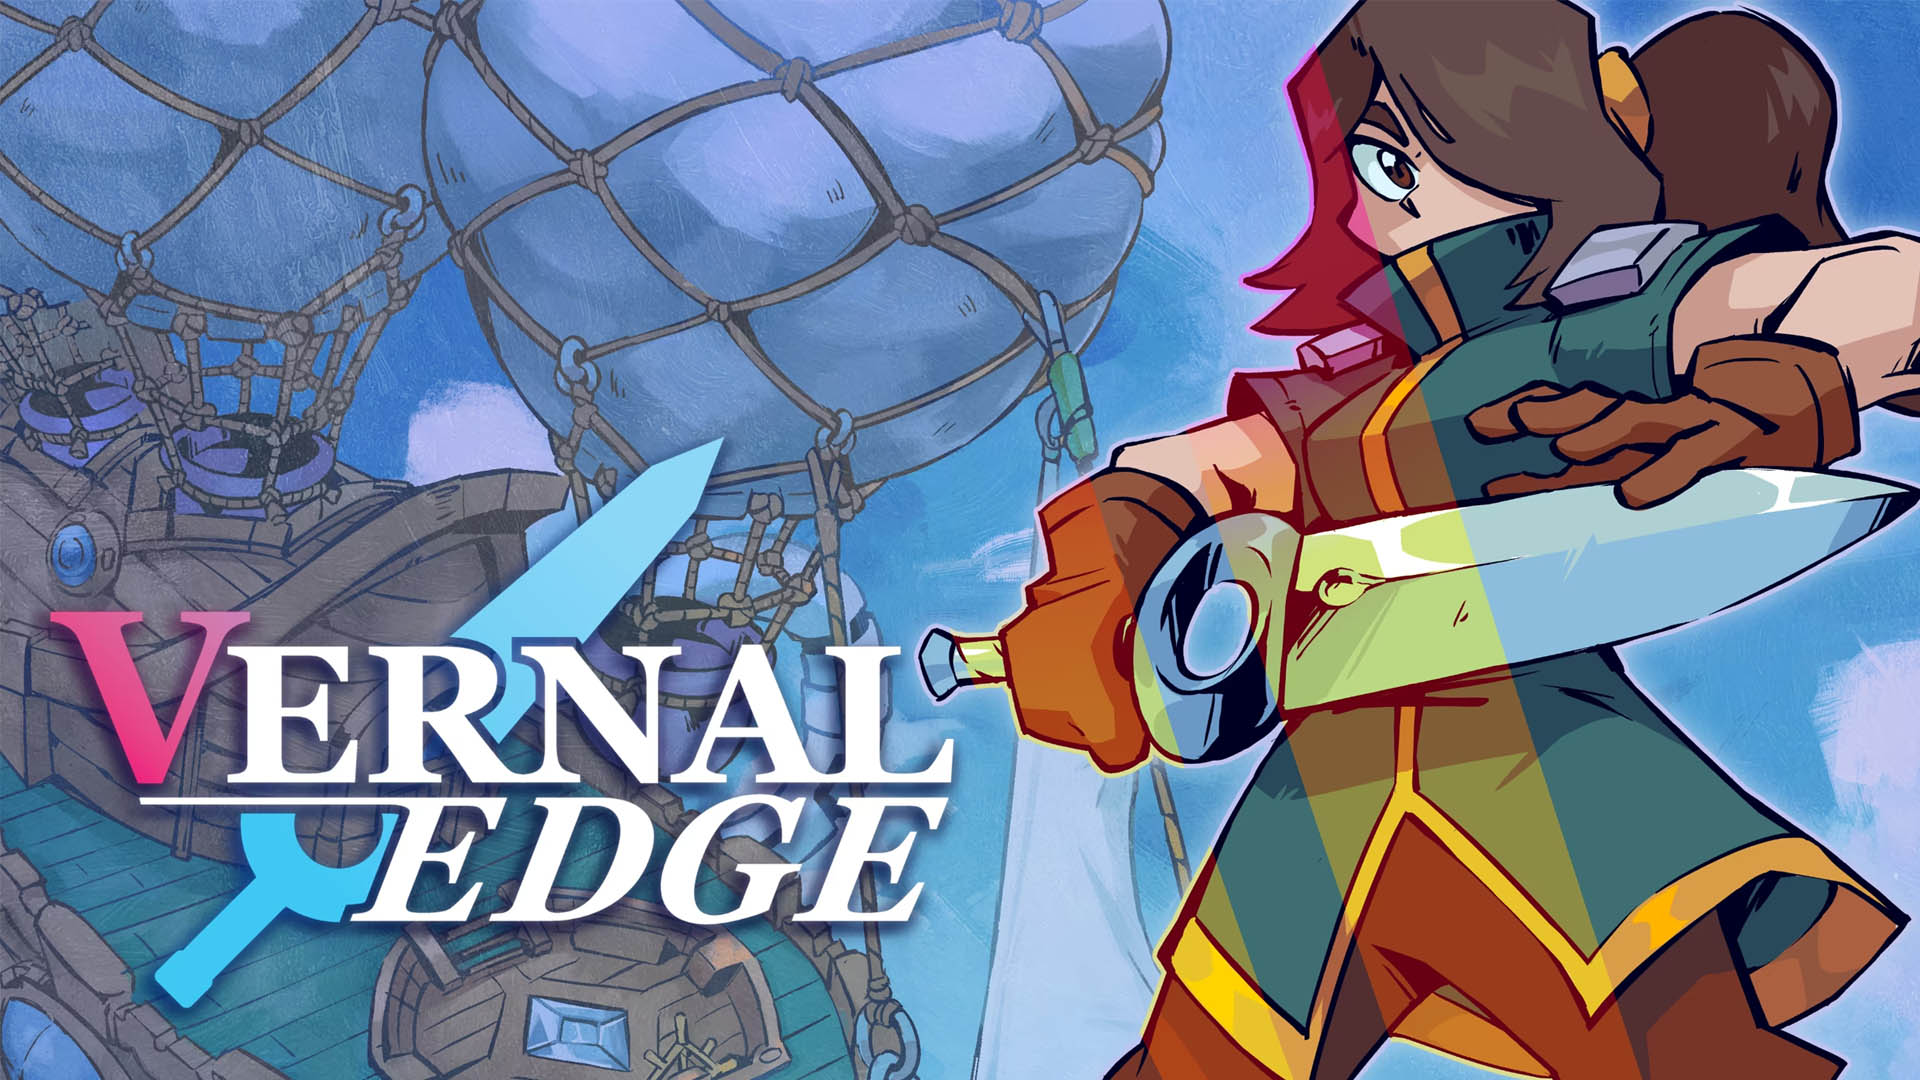 Vernal Edge gets release date in March